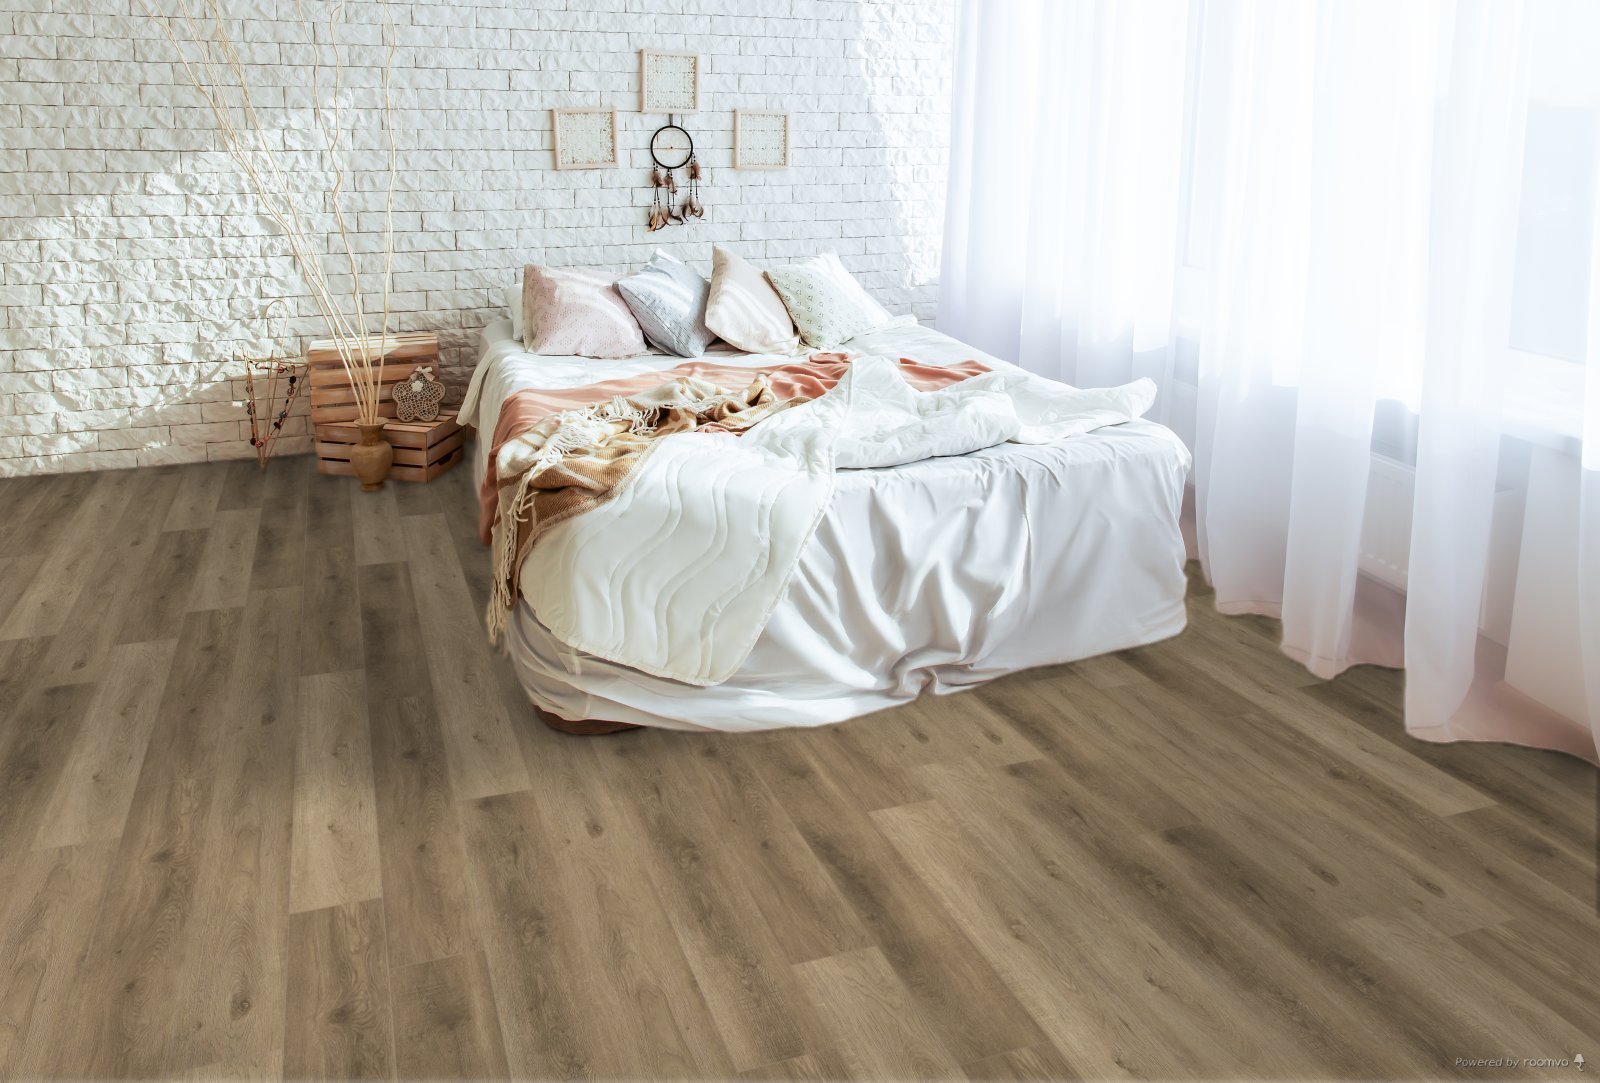 Horizen Flooring presents to you a picture of a quality wide plank Ponderosa luxury vinyl plank. NovoCore Premium EIR collection features a wide range of colors & designs that will compliment any interior. Natural wood grain synchronized surface allow for an authentic hardwood look & feel. This collection features a 0.25″ / 6.5 mm overall thickness and a durable 22 mil / 0.55 mm wear layer for residential and commercial applications.